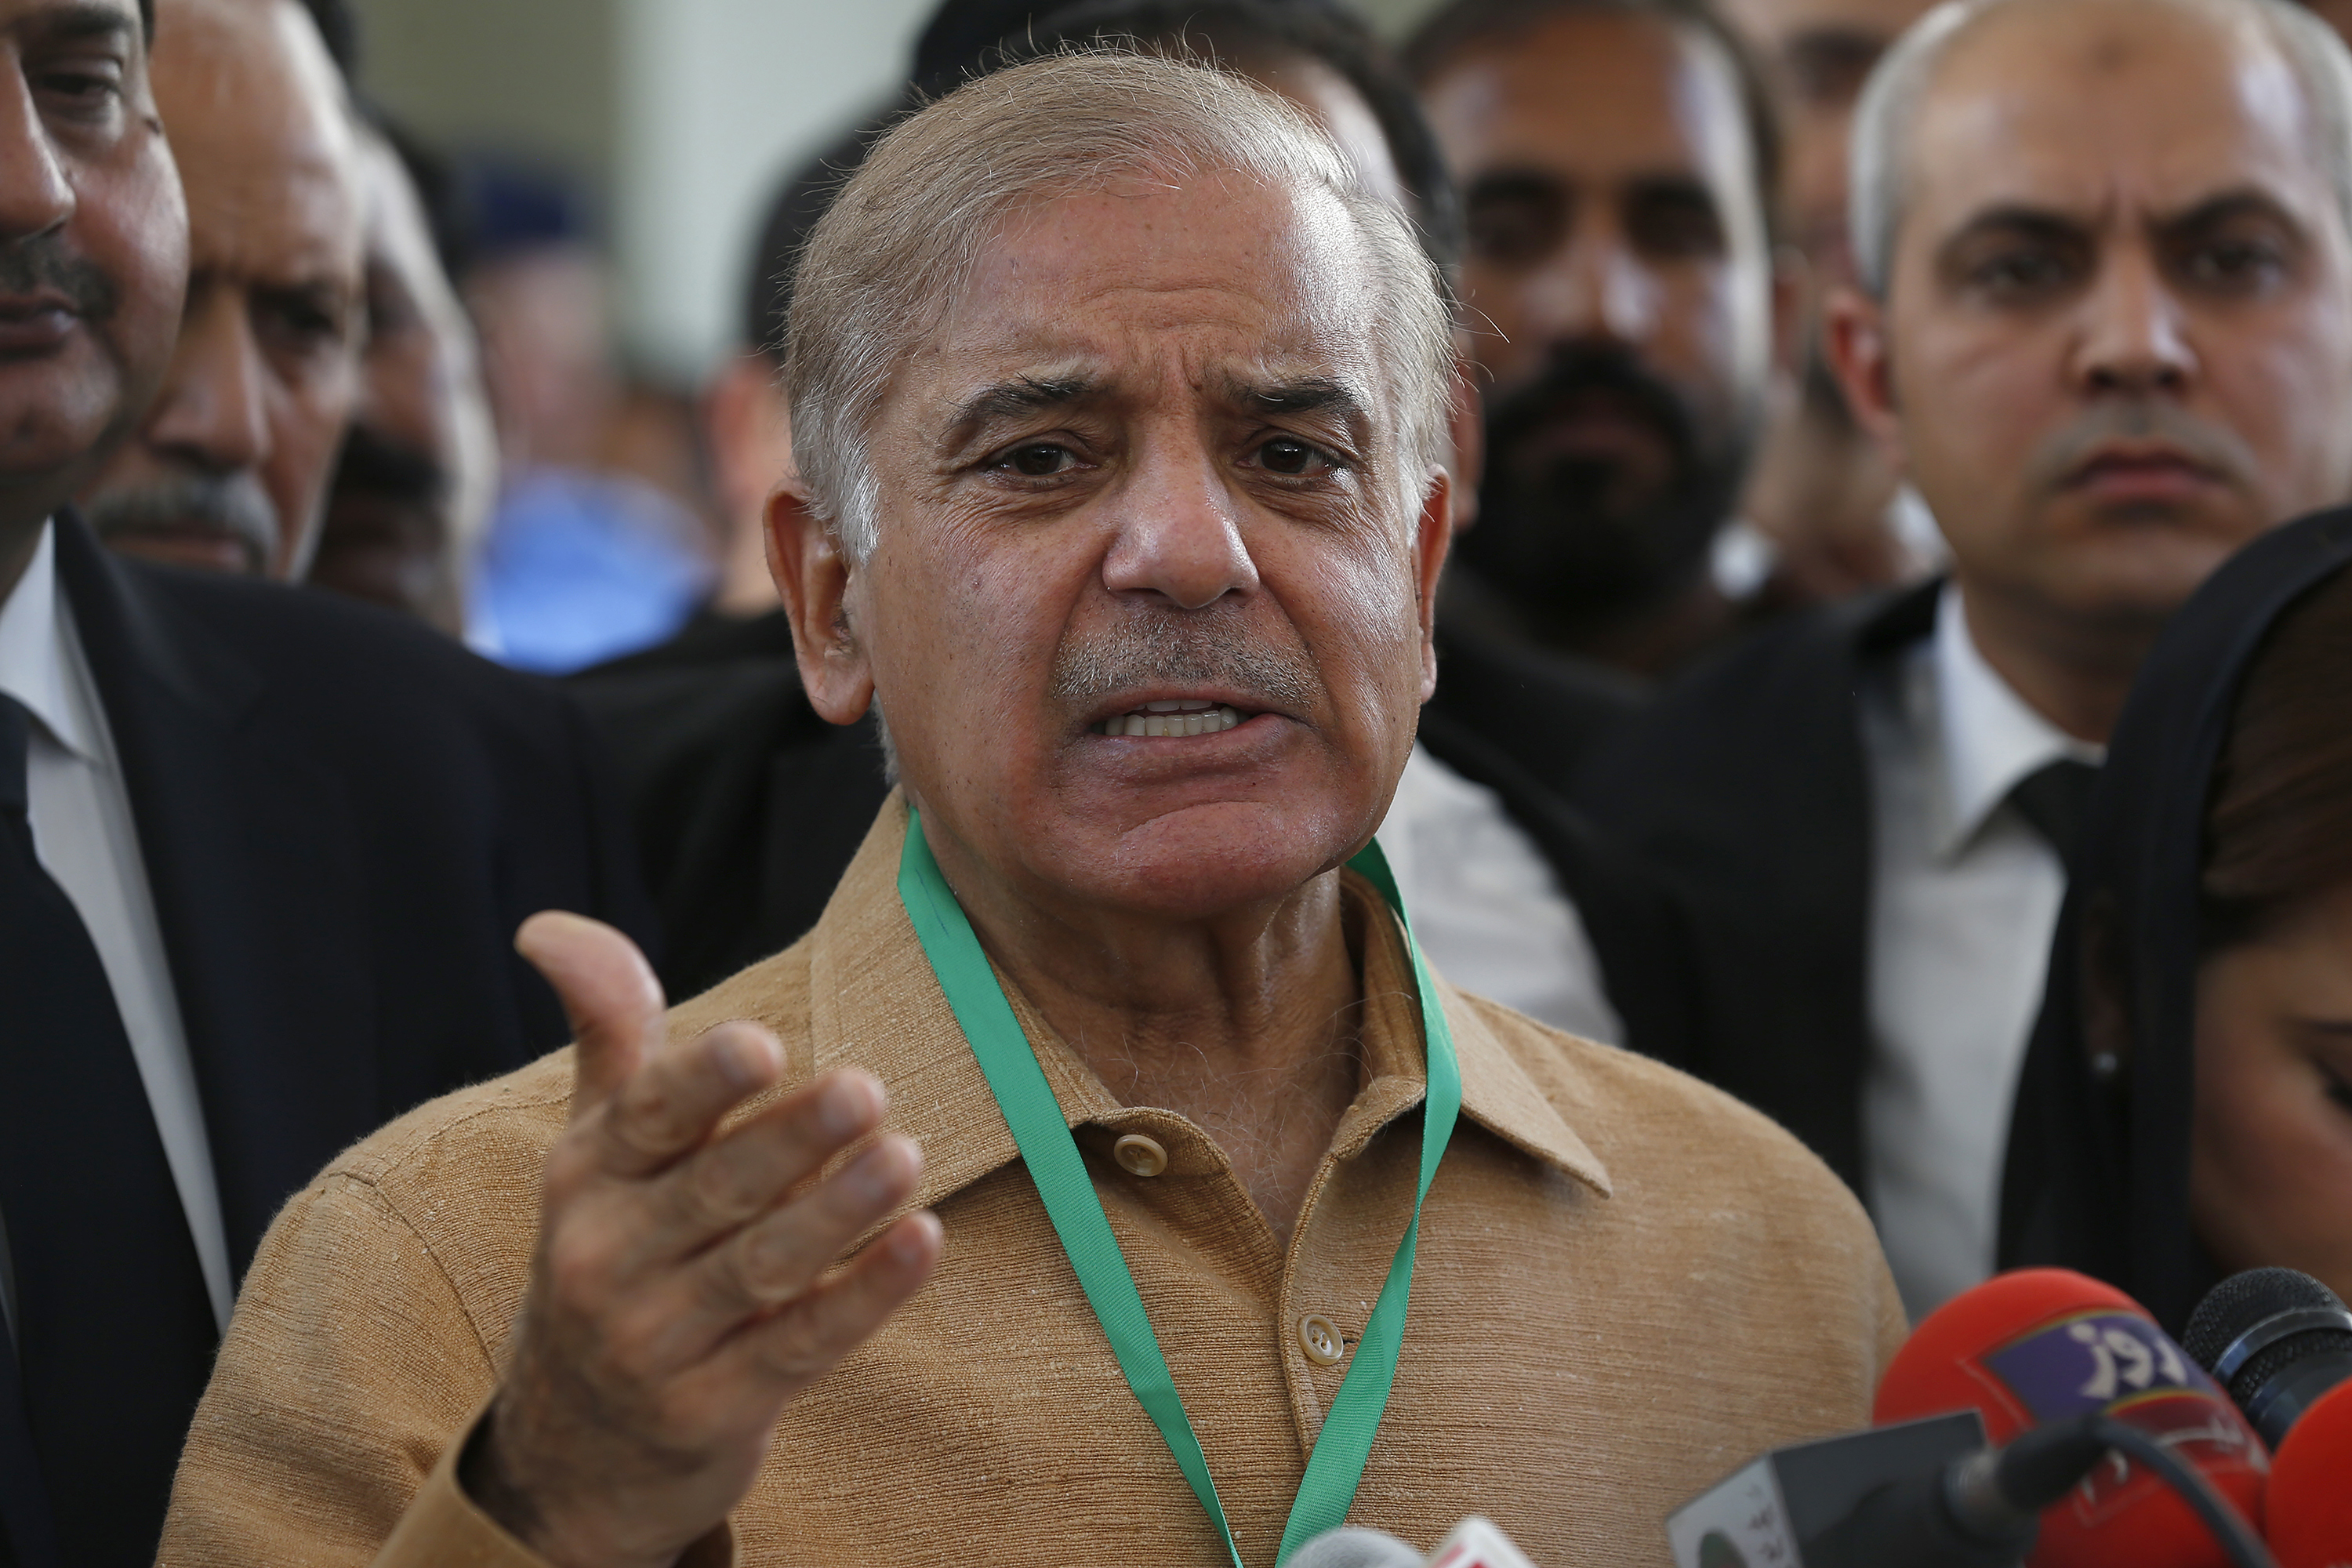 Pakistani Prime Minister Shahbaz Sharif offered his condolences in a tweet Wednesday.